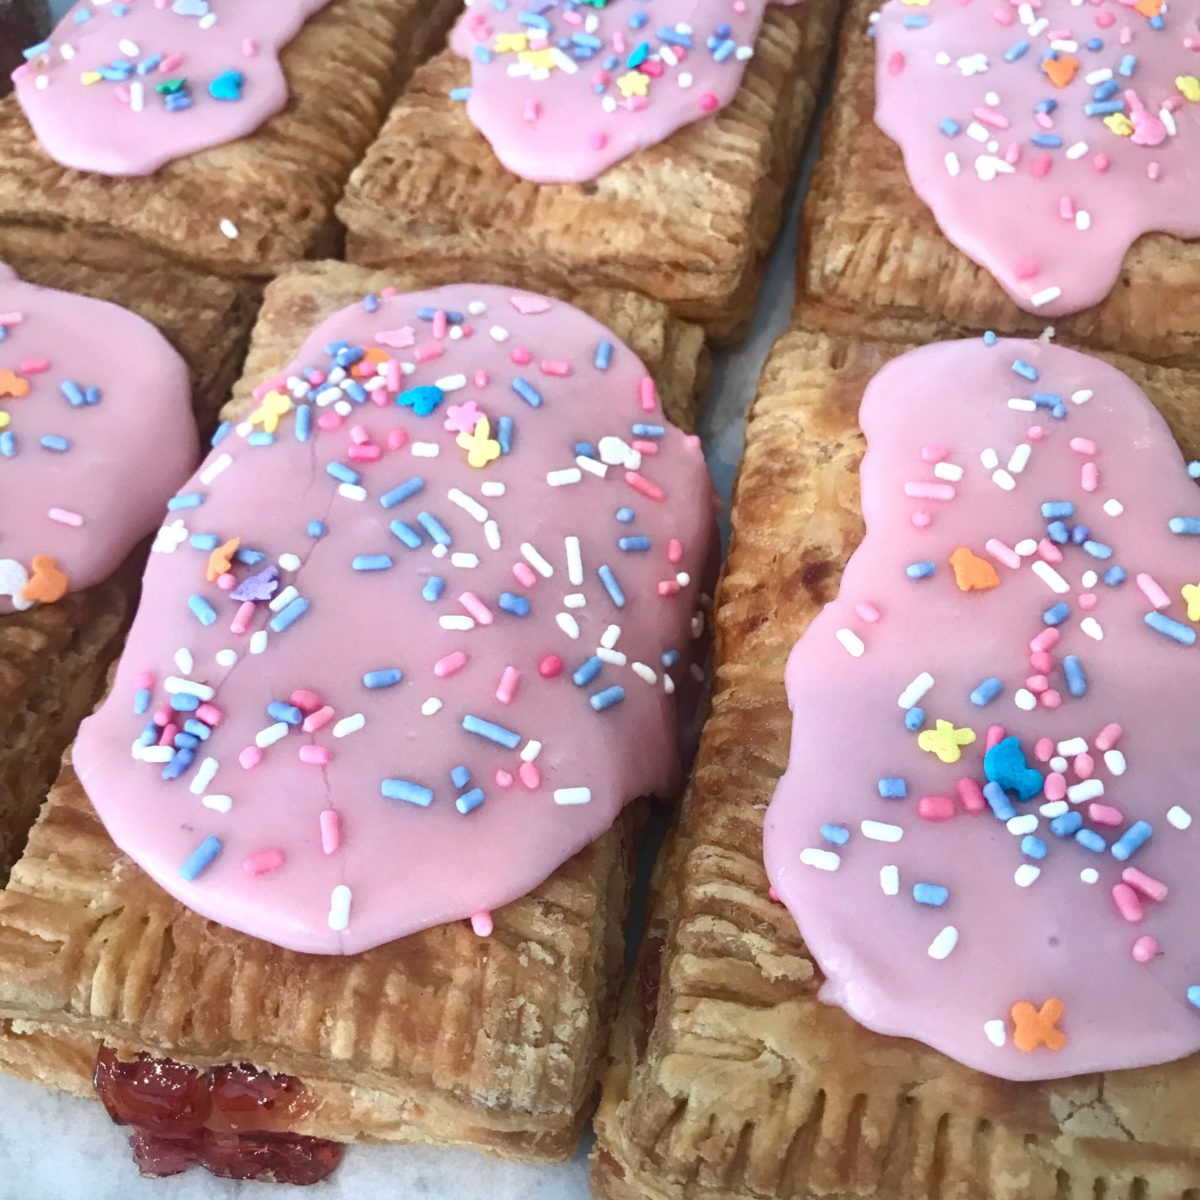 strawberry poptart with pink frosting and multicolored sprinkles